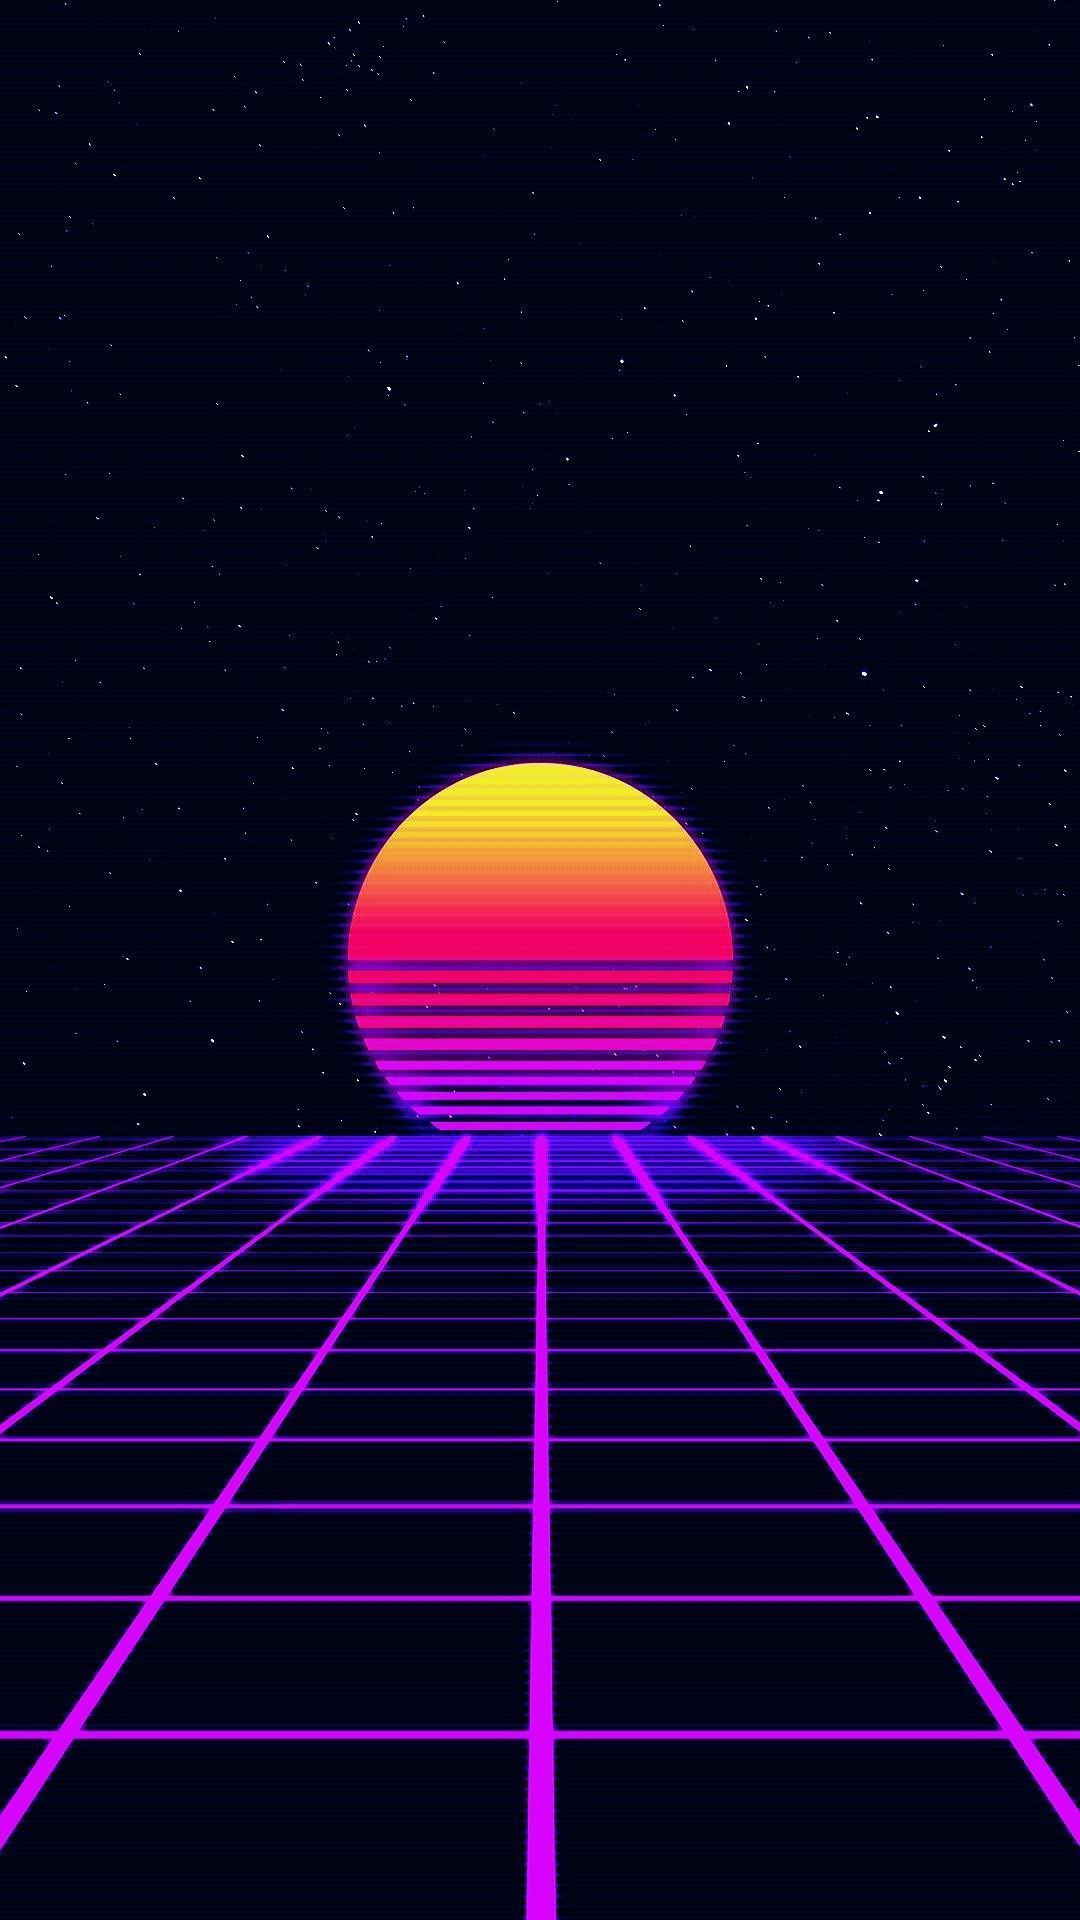 All Synthwave retro and retrowave style of arts #synthwave #chill #chillsynth. Papel de parede vaporwave, Papel de parede wallpaper, Papel de parede para telefone